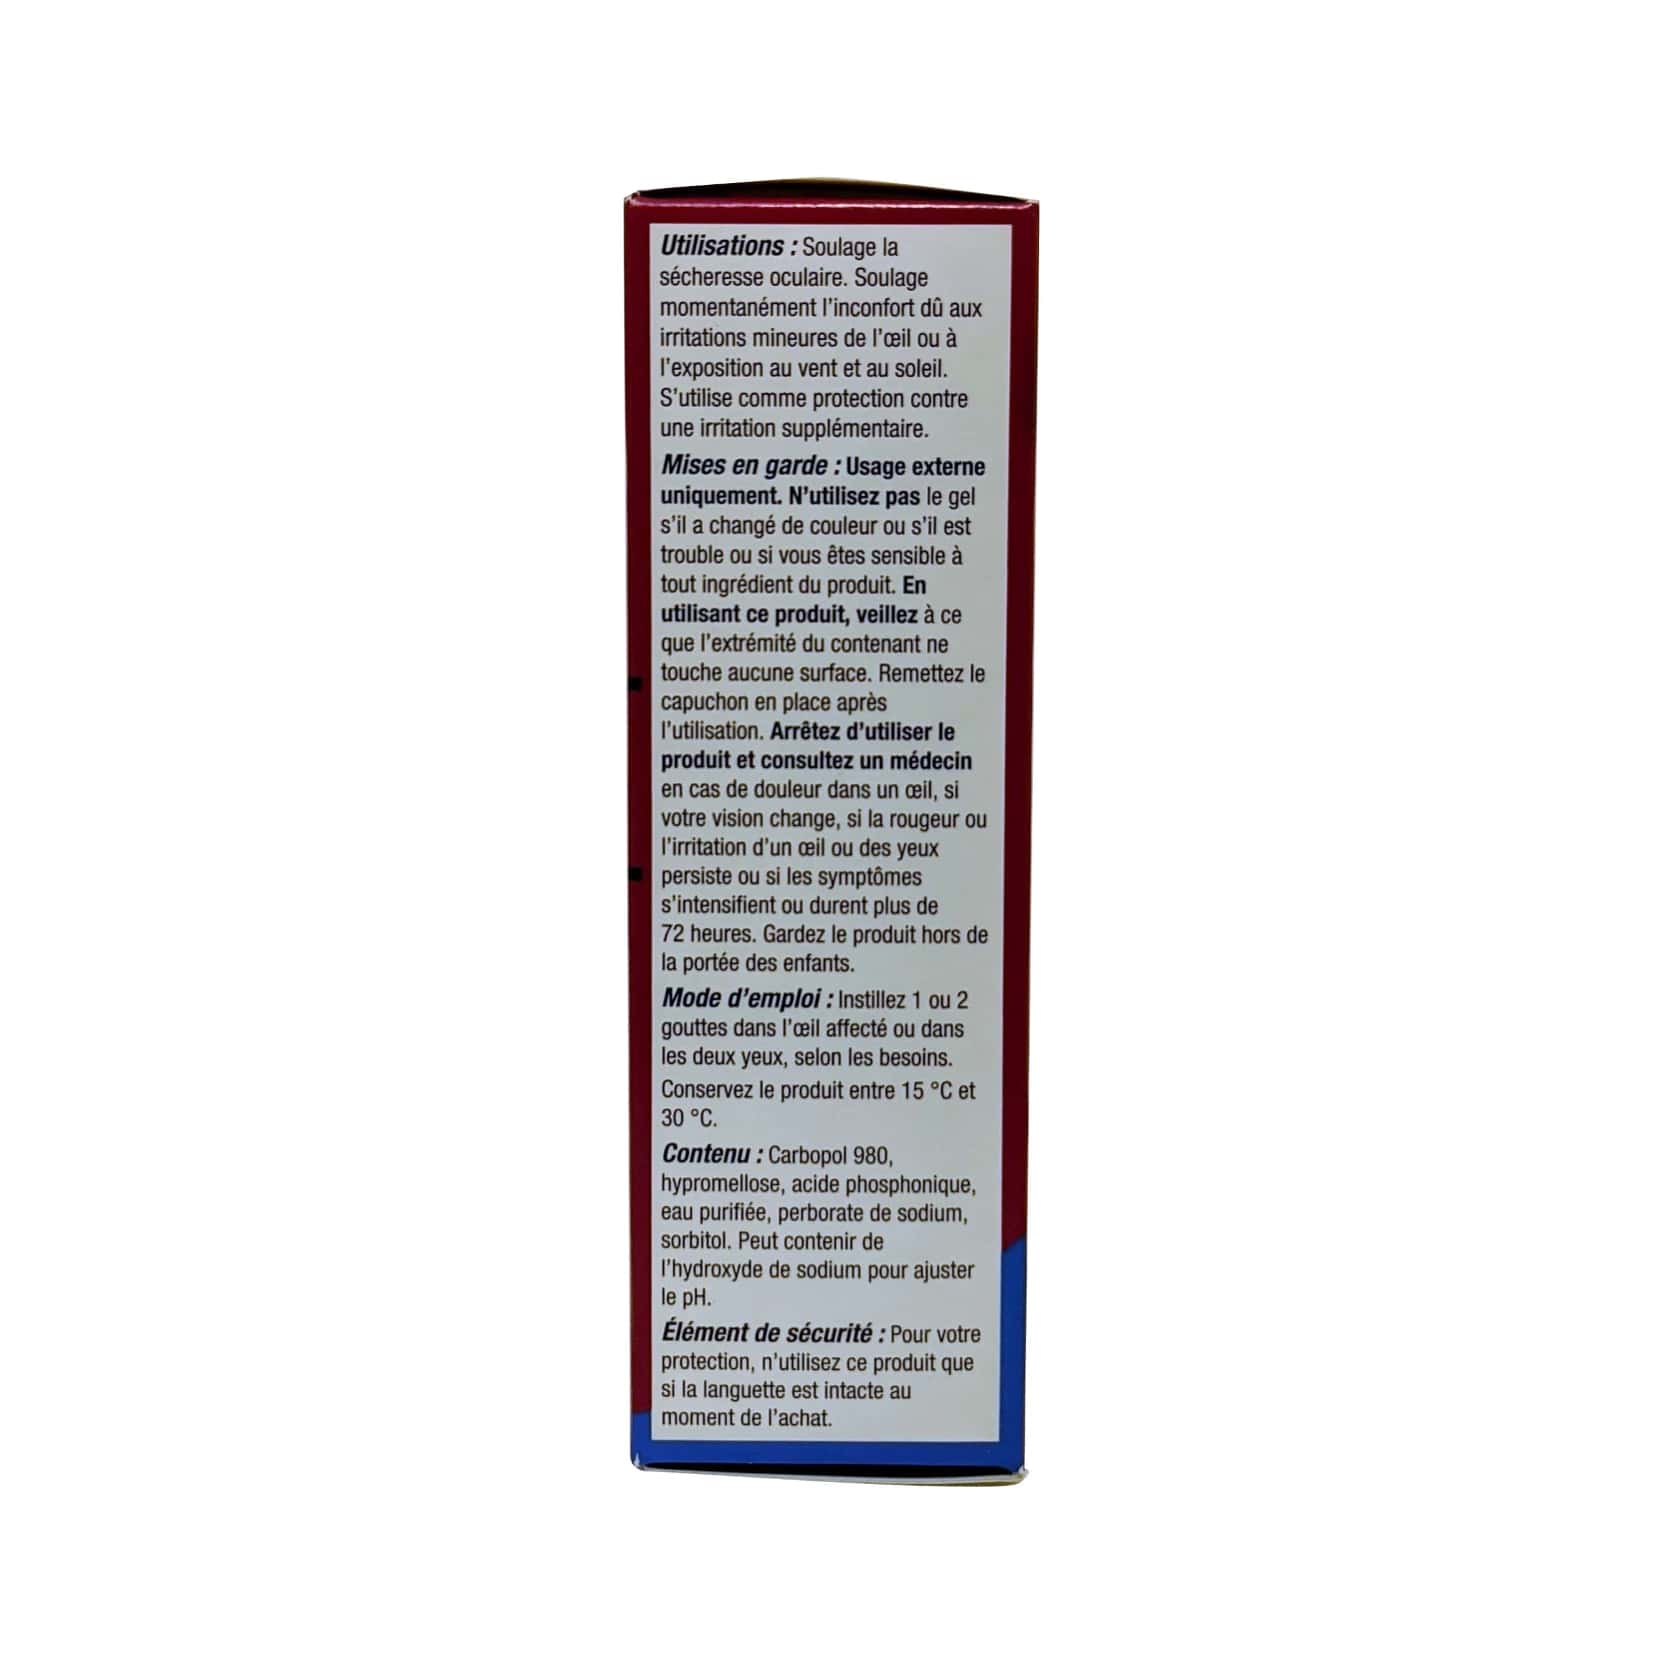 Product details, ingredients, directions, and warnings for Alcon Systane Gel Anytime Protection Lubricant Eye Gel in French